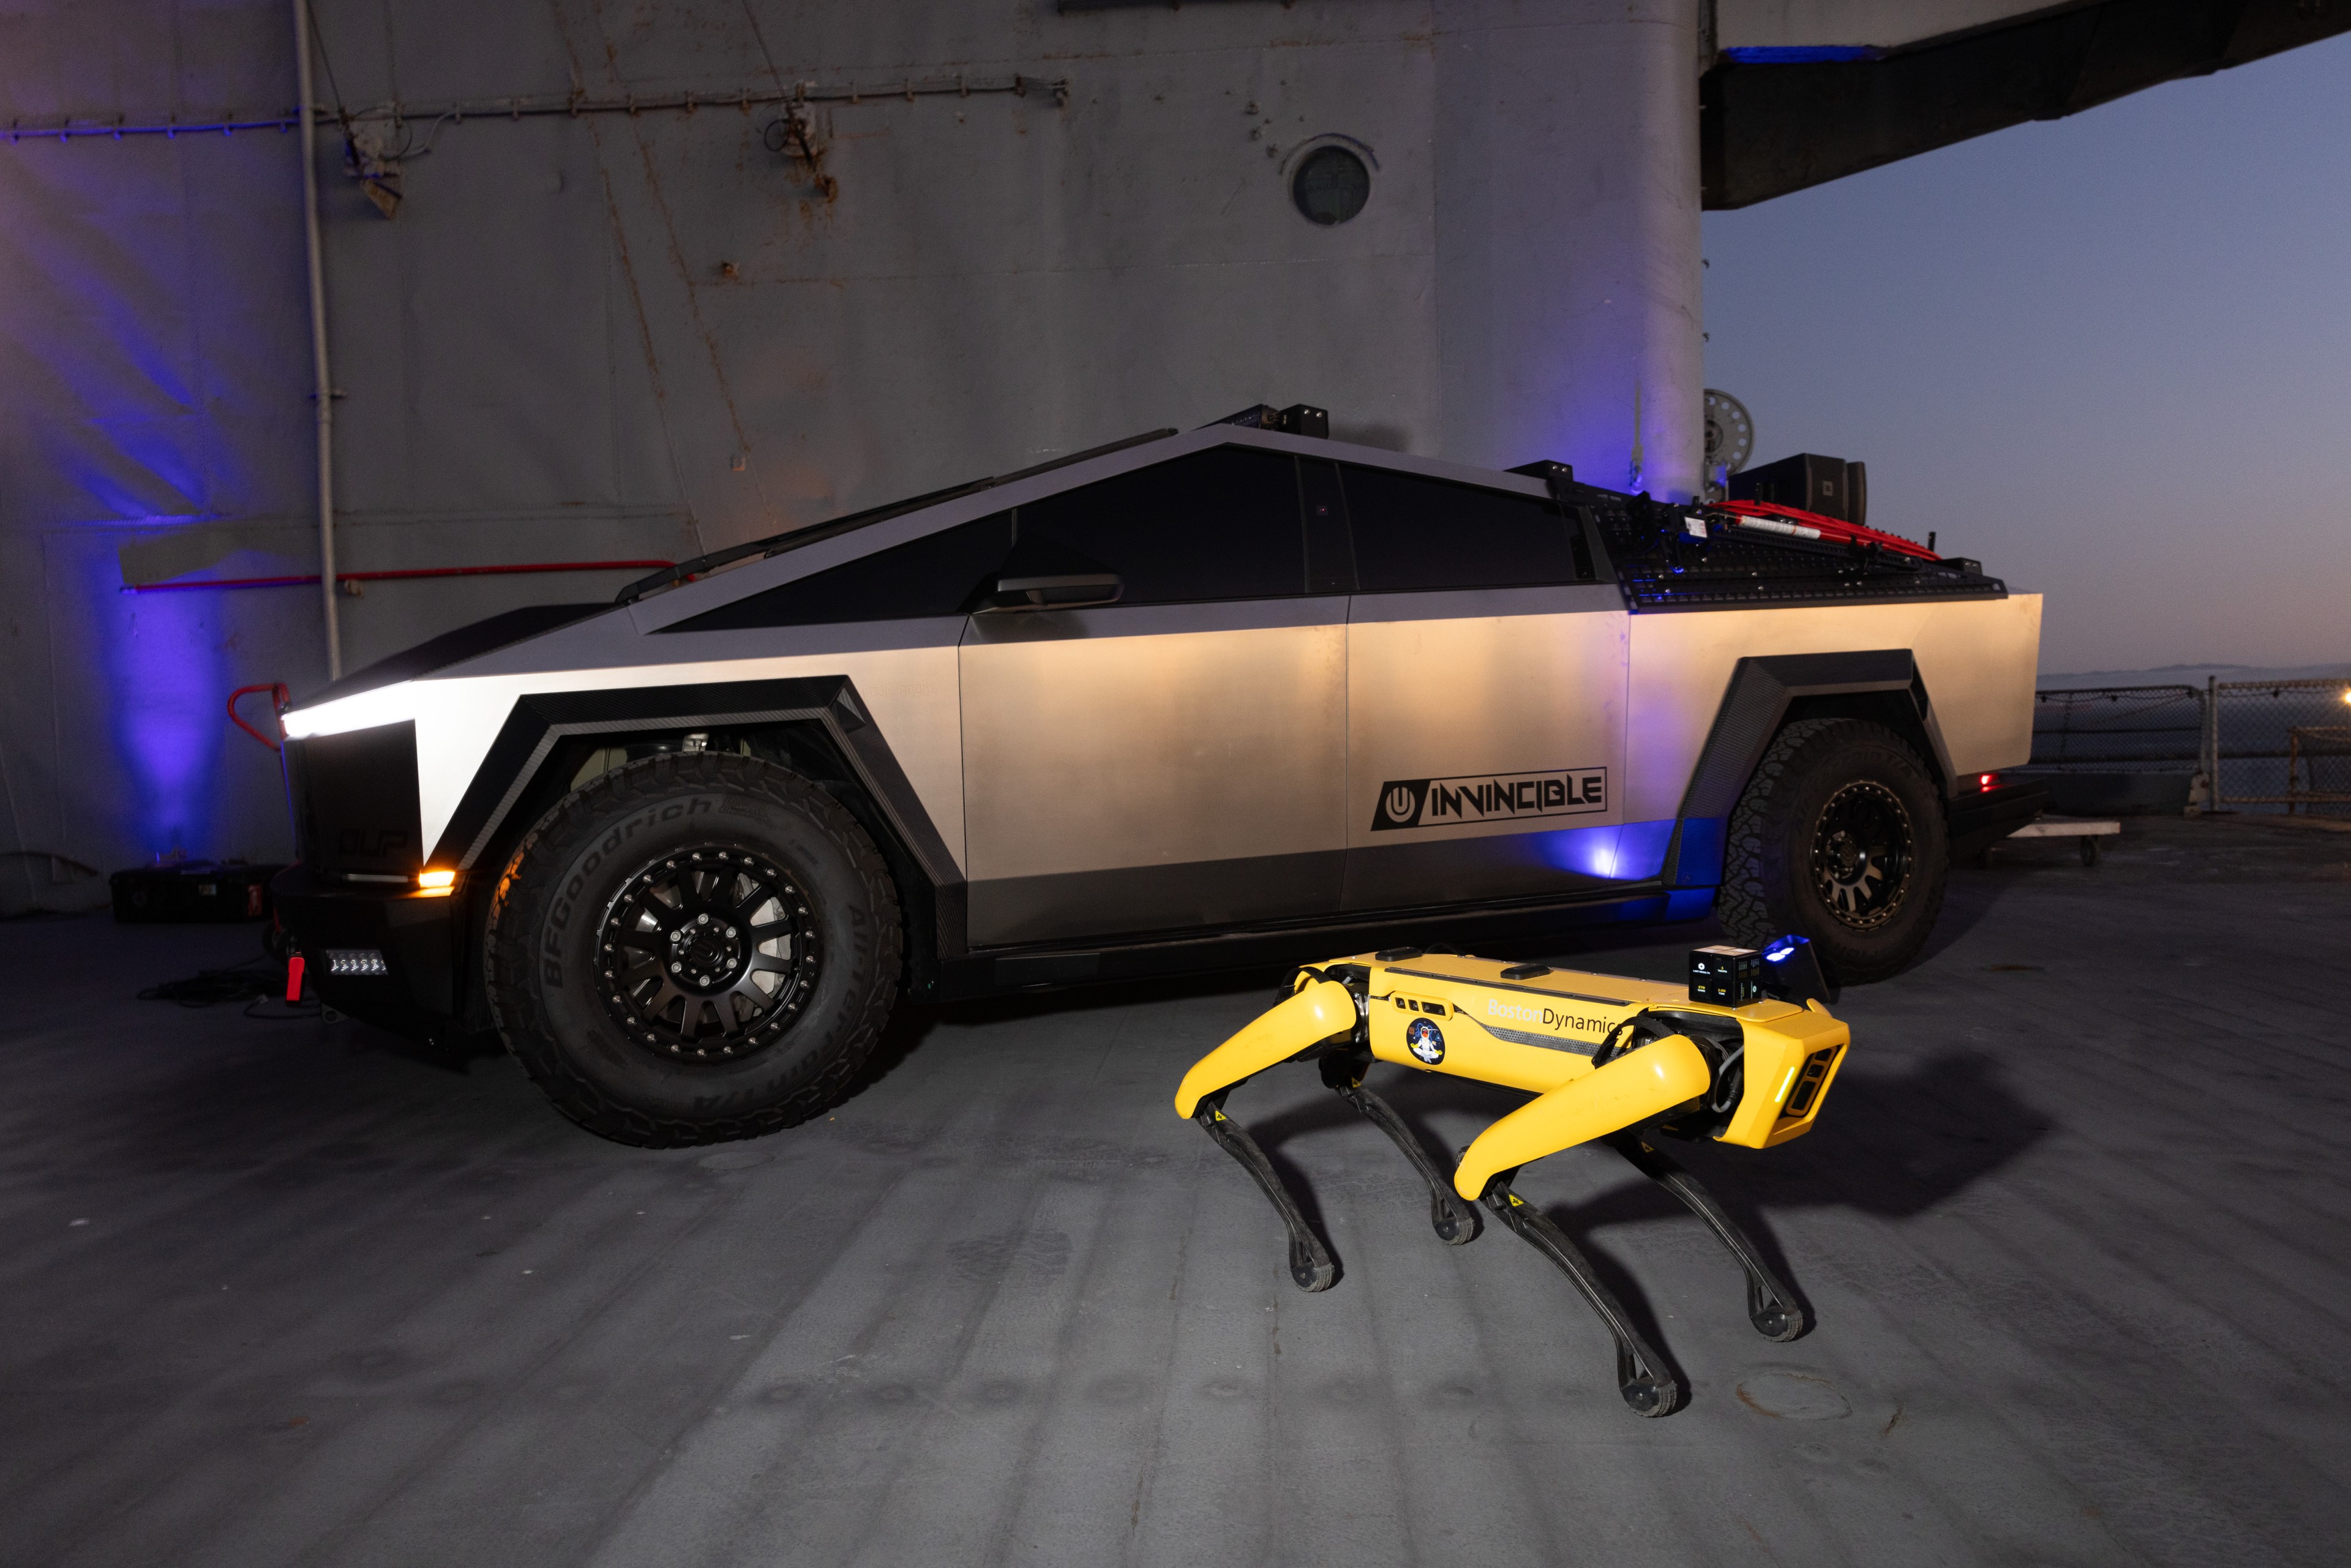 A futuristic silver truck with angular design and large tires is parked indoors next to a yellow, four-legged robotic device on a gray floor.